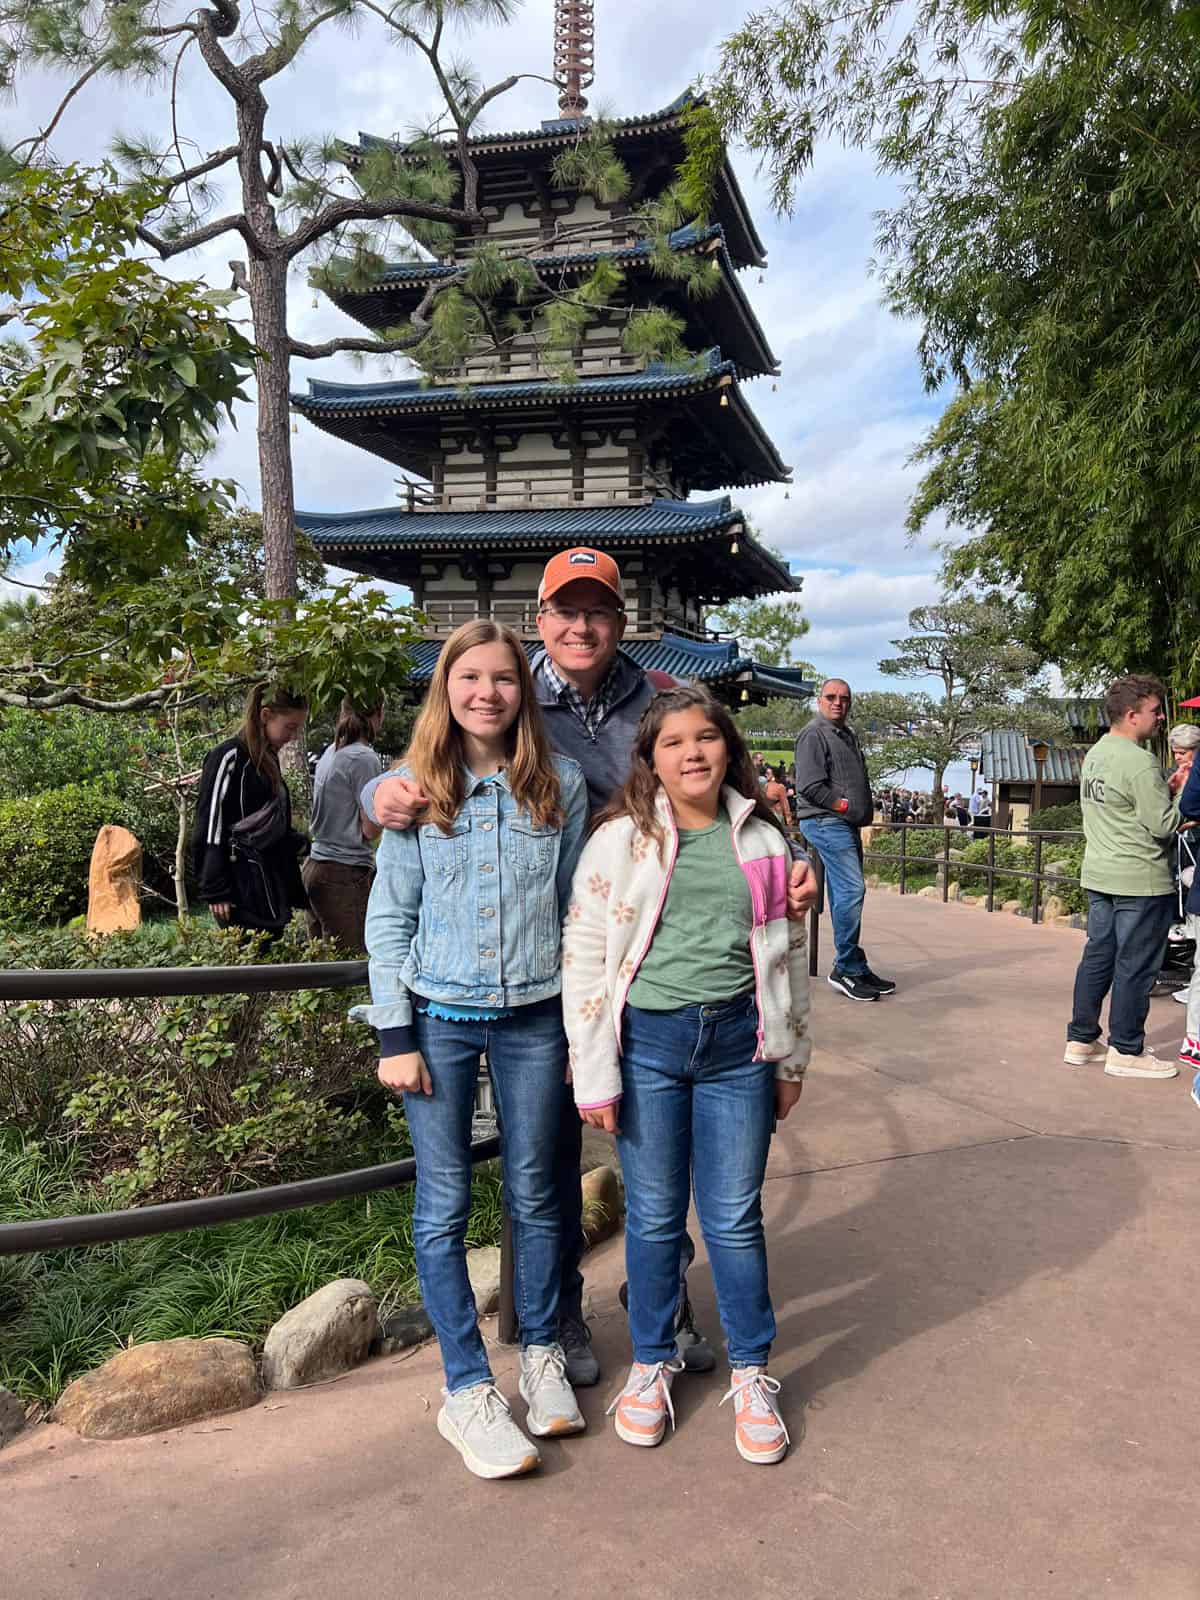 A dad and two kids in the Japan region at Epcot.